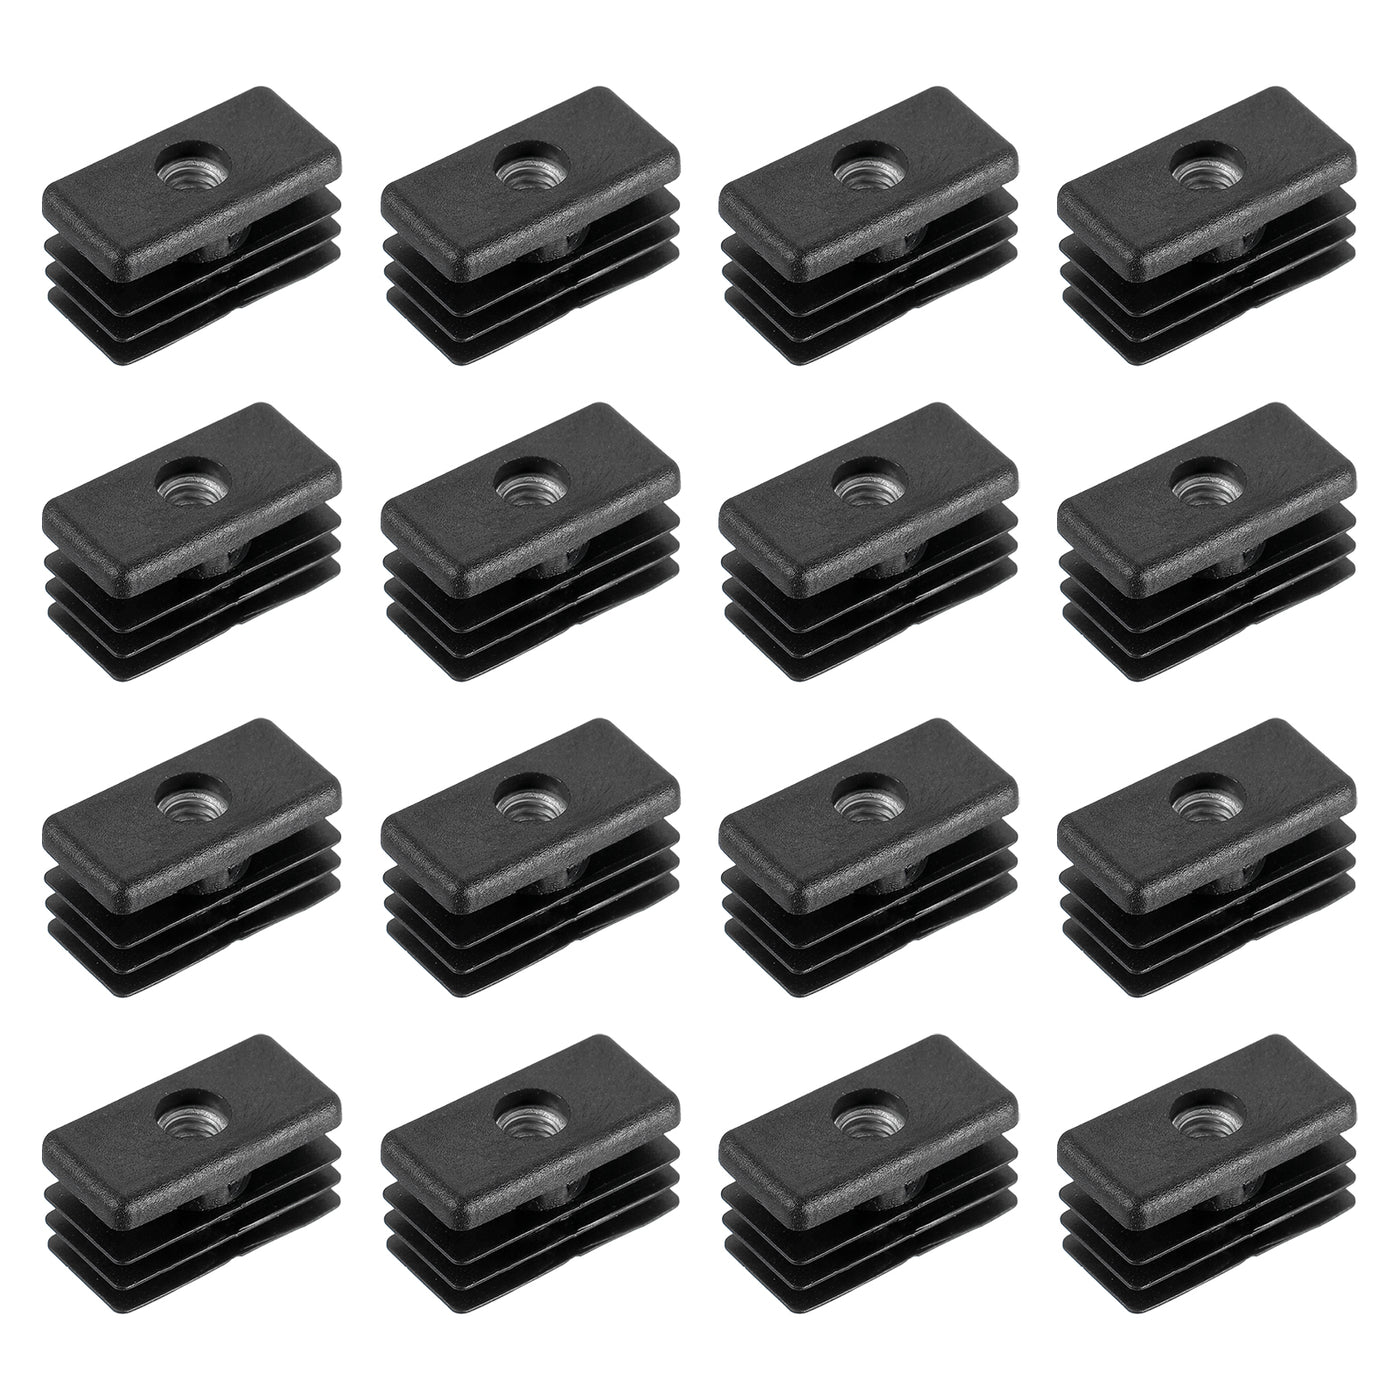 uxcell Uxcell 16Pcs 1.18"x0.59" Caster Insert with Thread, Rectangle M6 Thread for Furniture